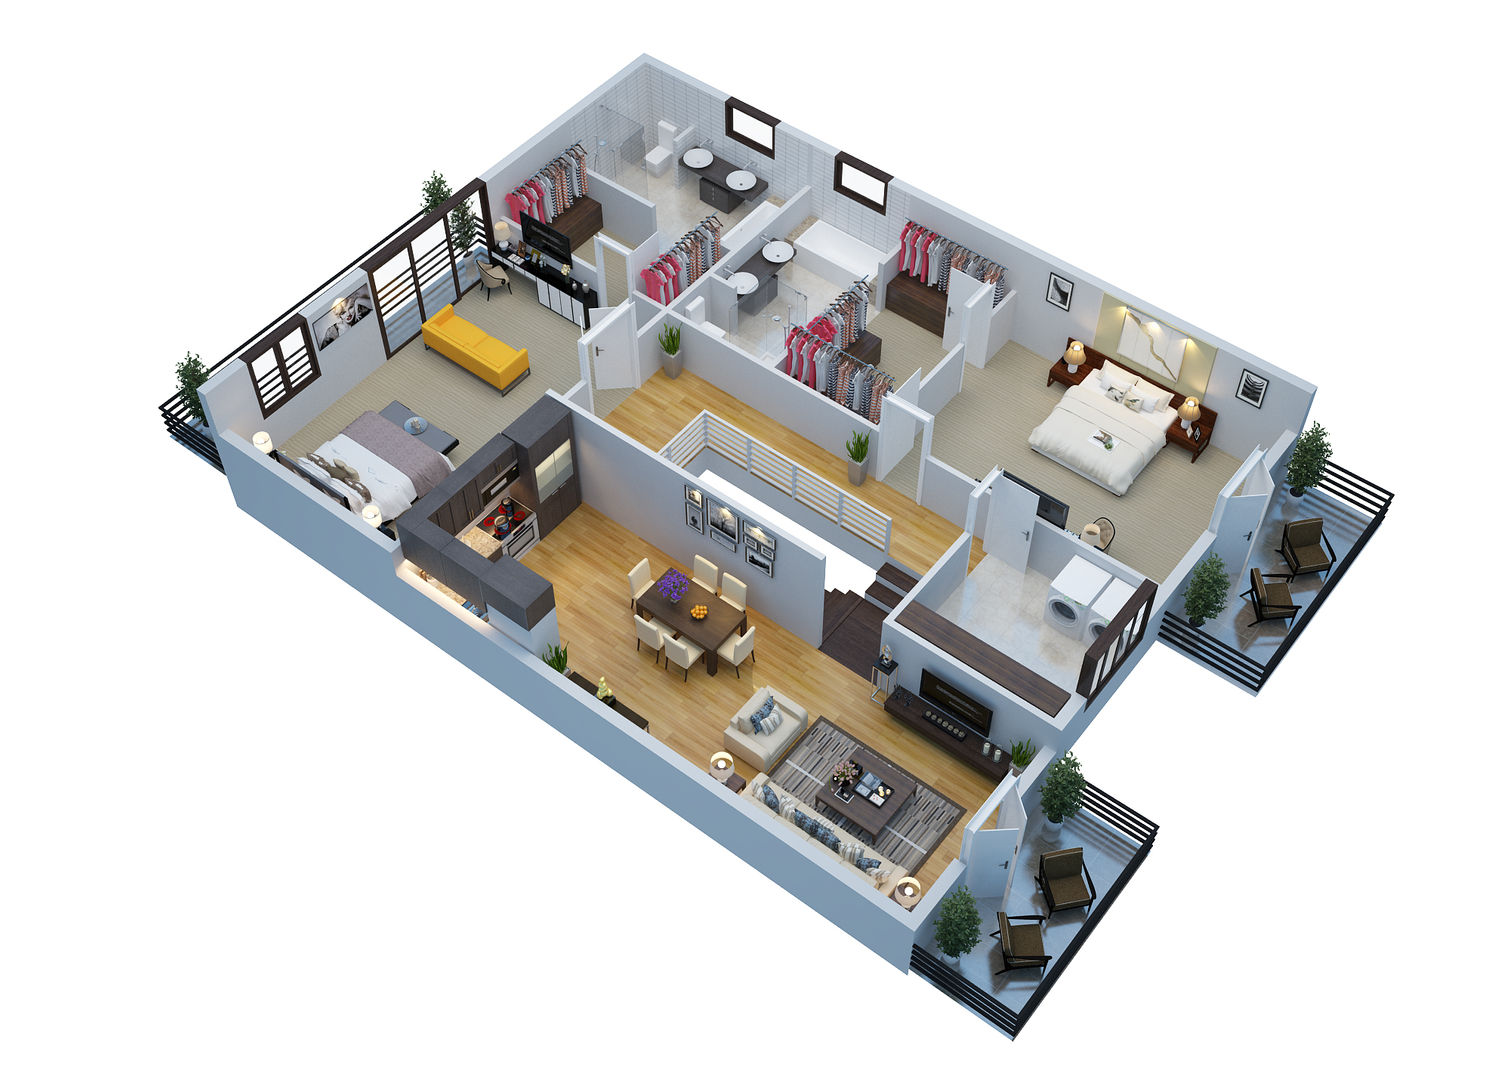 House Plans - How to Design Your Home Plan Online